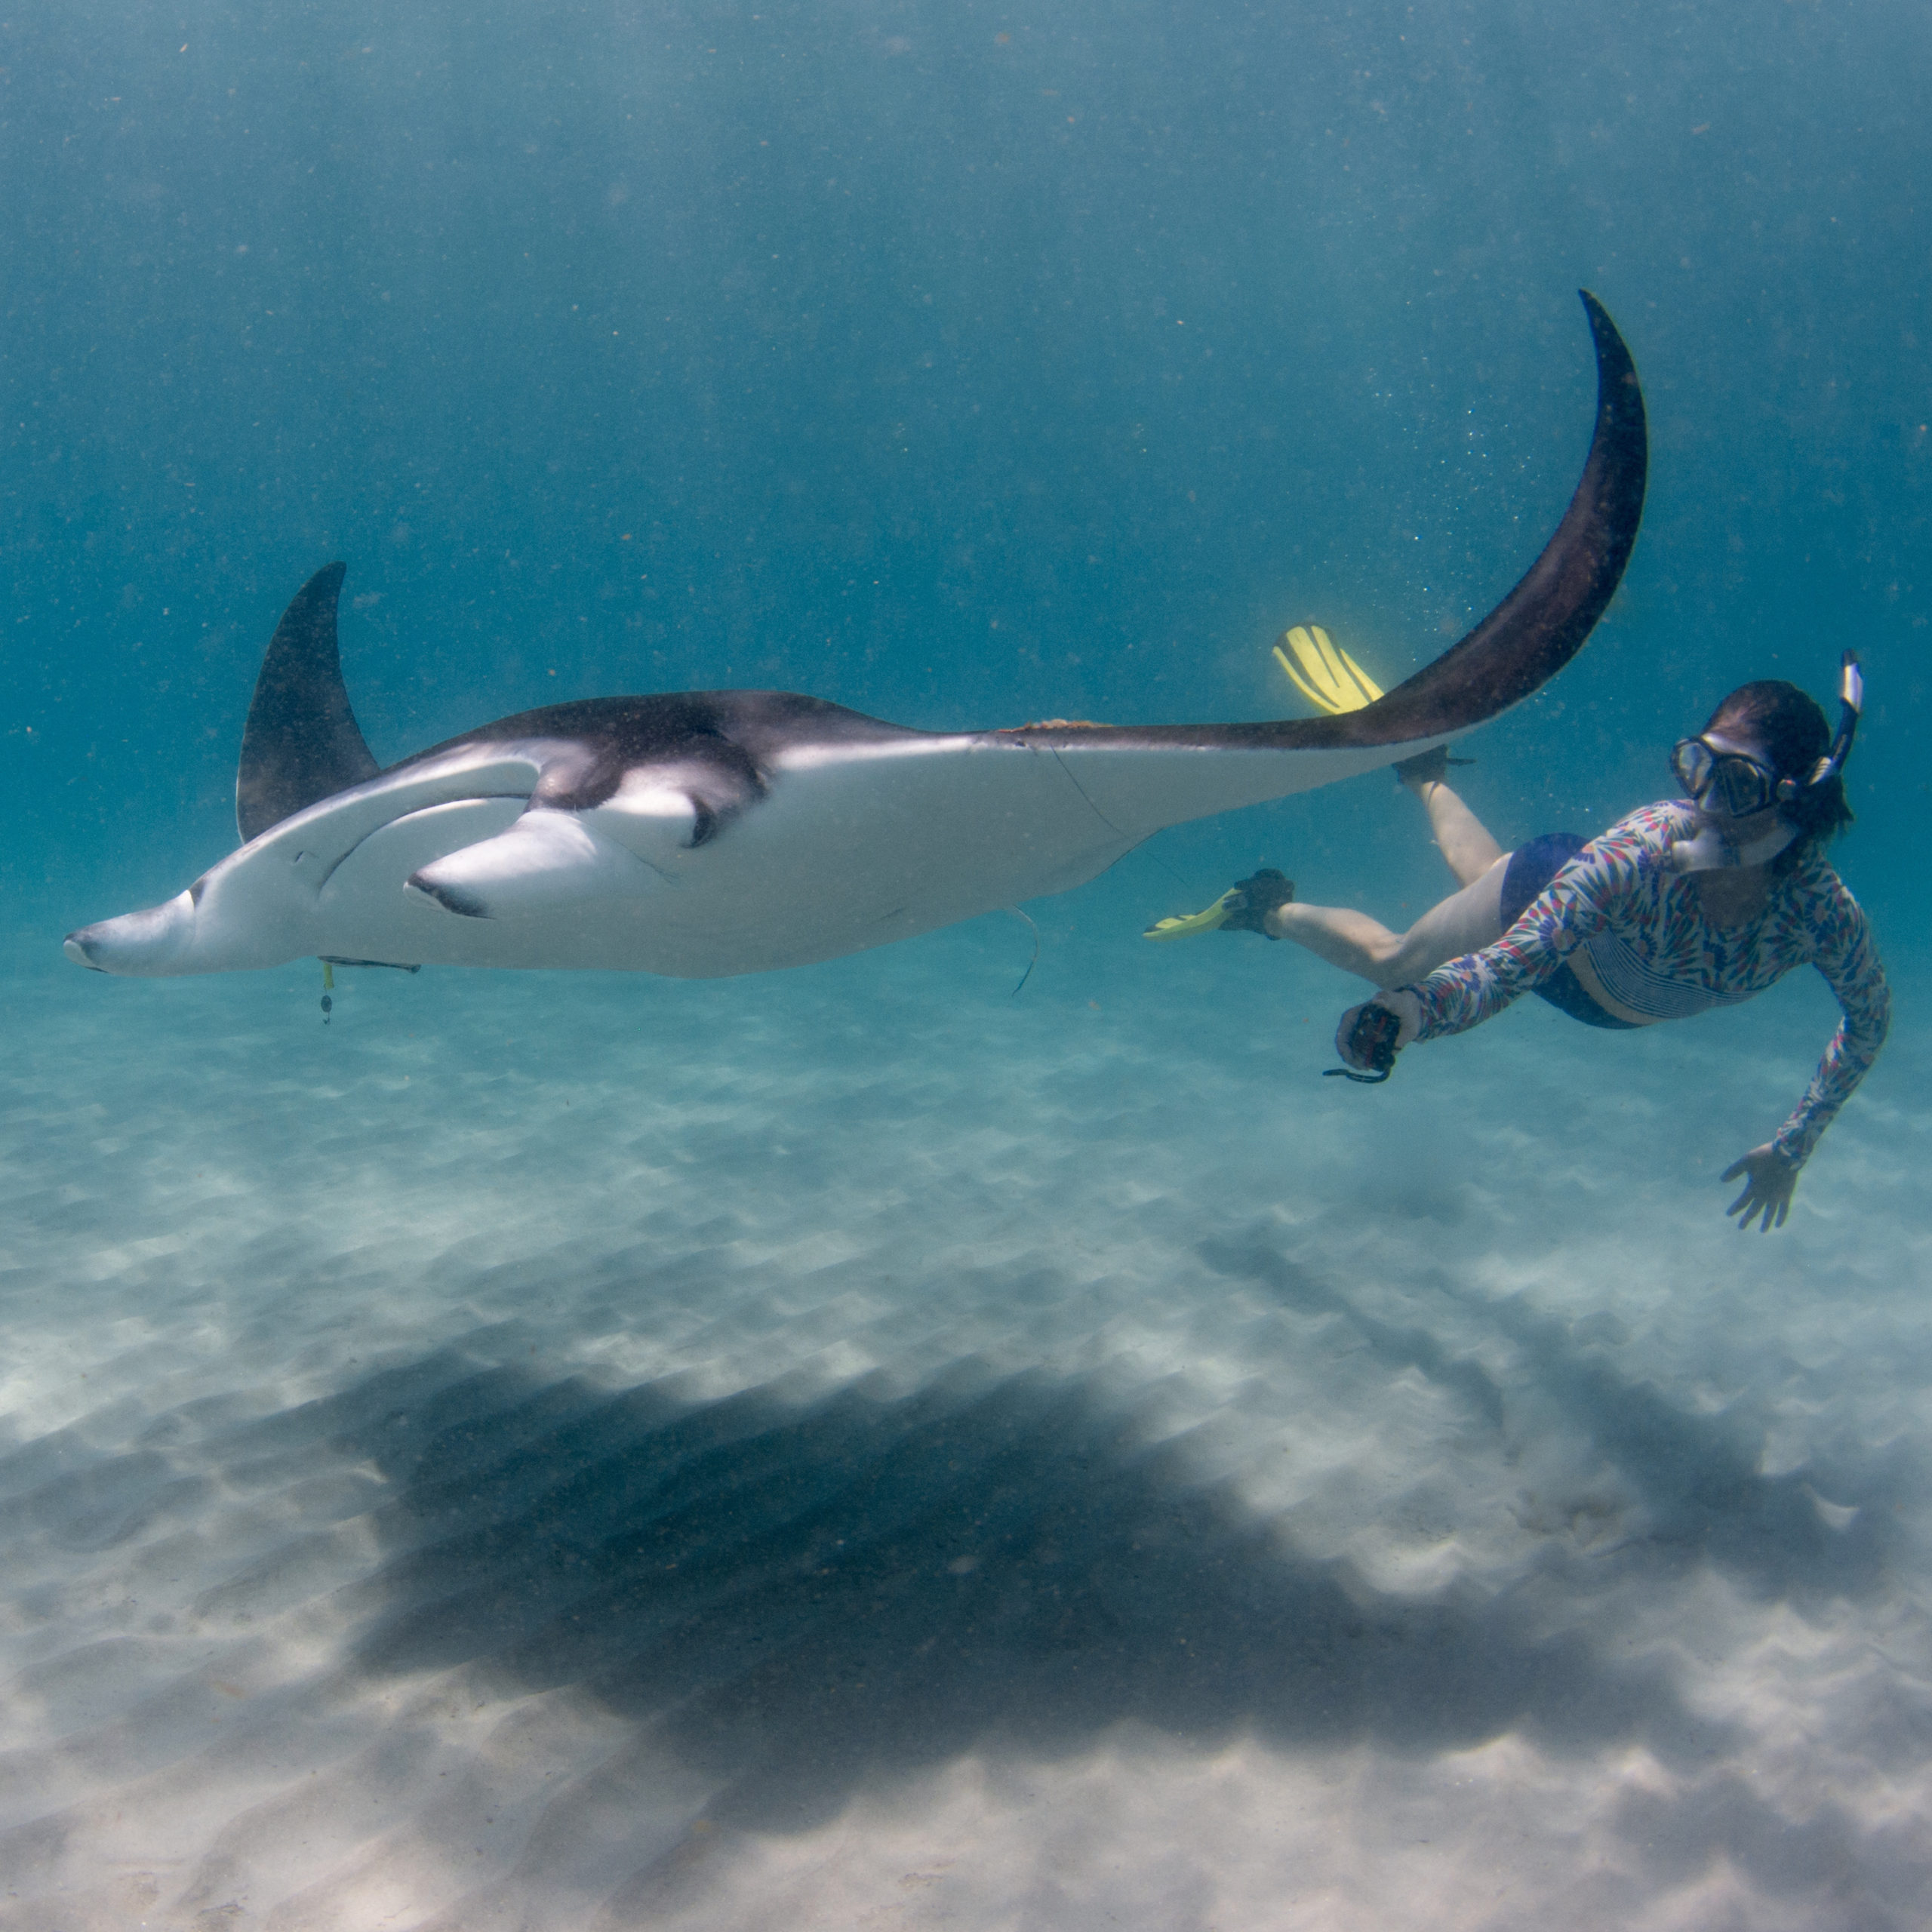 Freediving to take an identification photo of a young manta ray. PC: Bethany Augliere